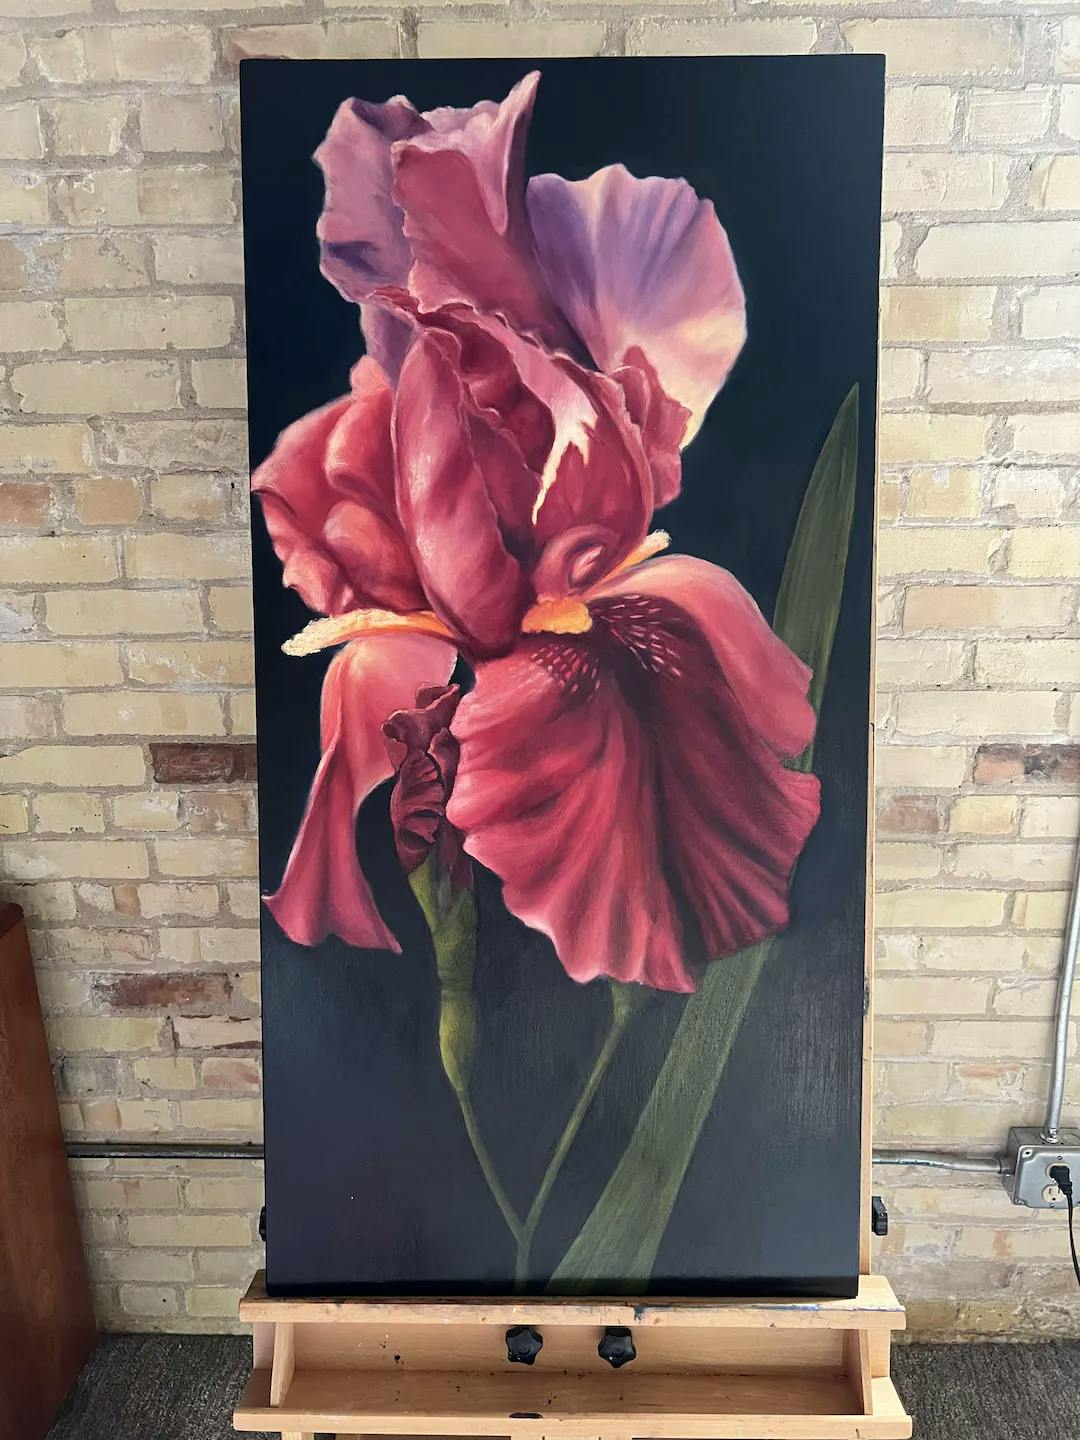 Peggy Slattery - An Iris Collection of 5